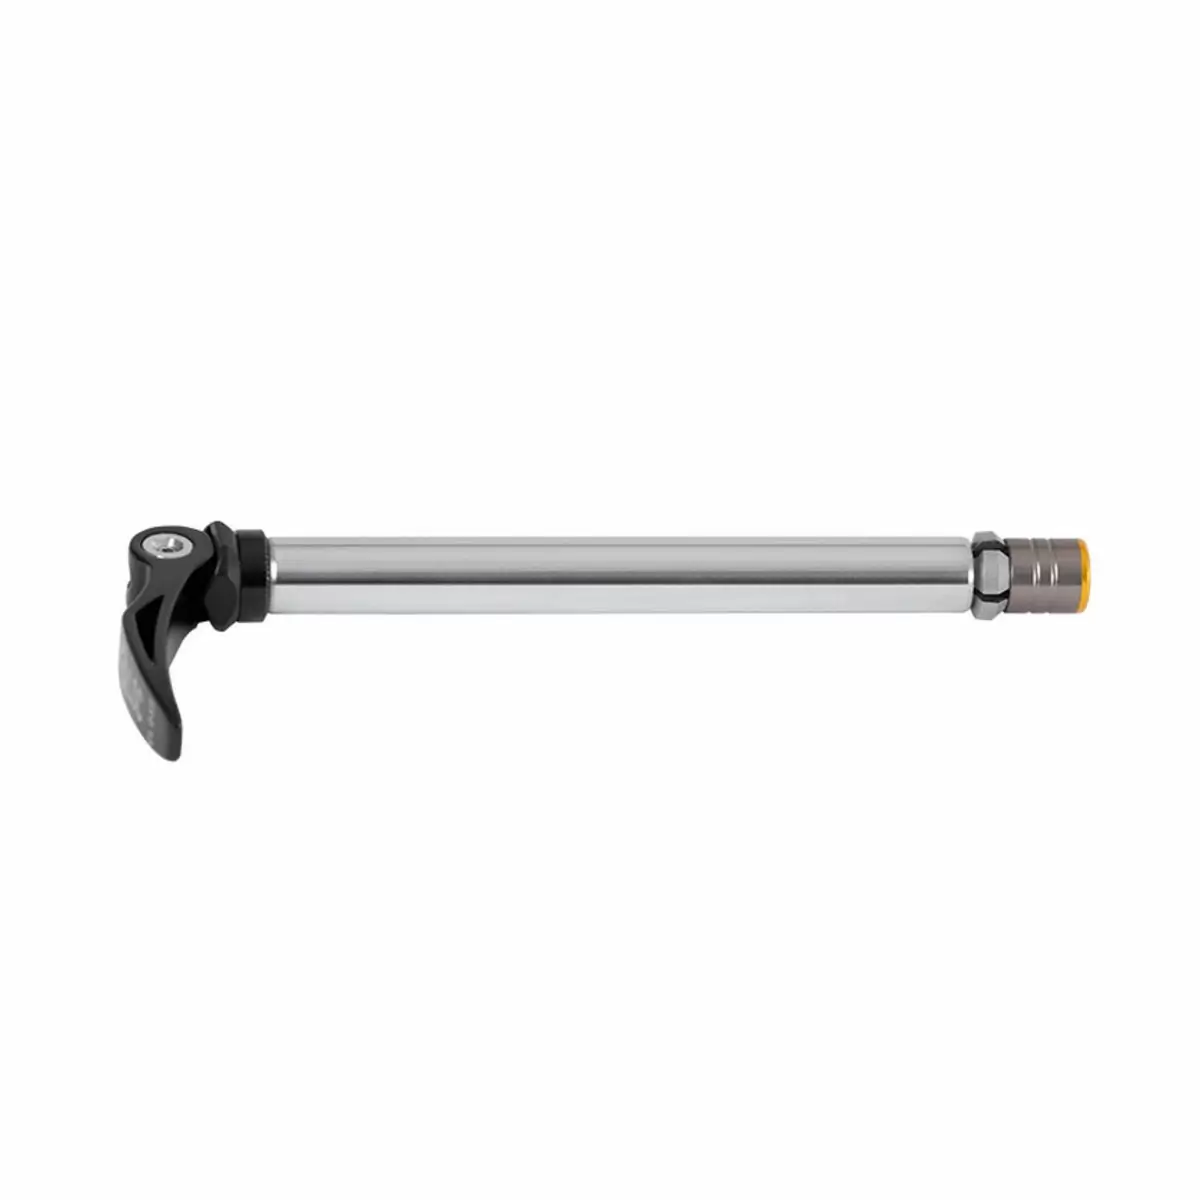 thru axle 15qlc 32 quick release system 15/100mm - image